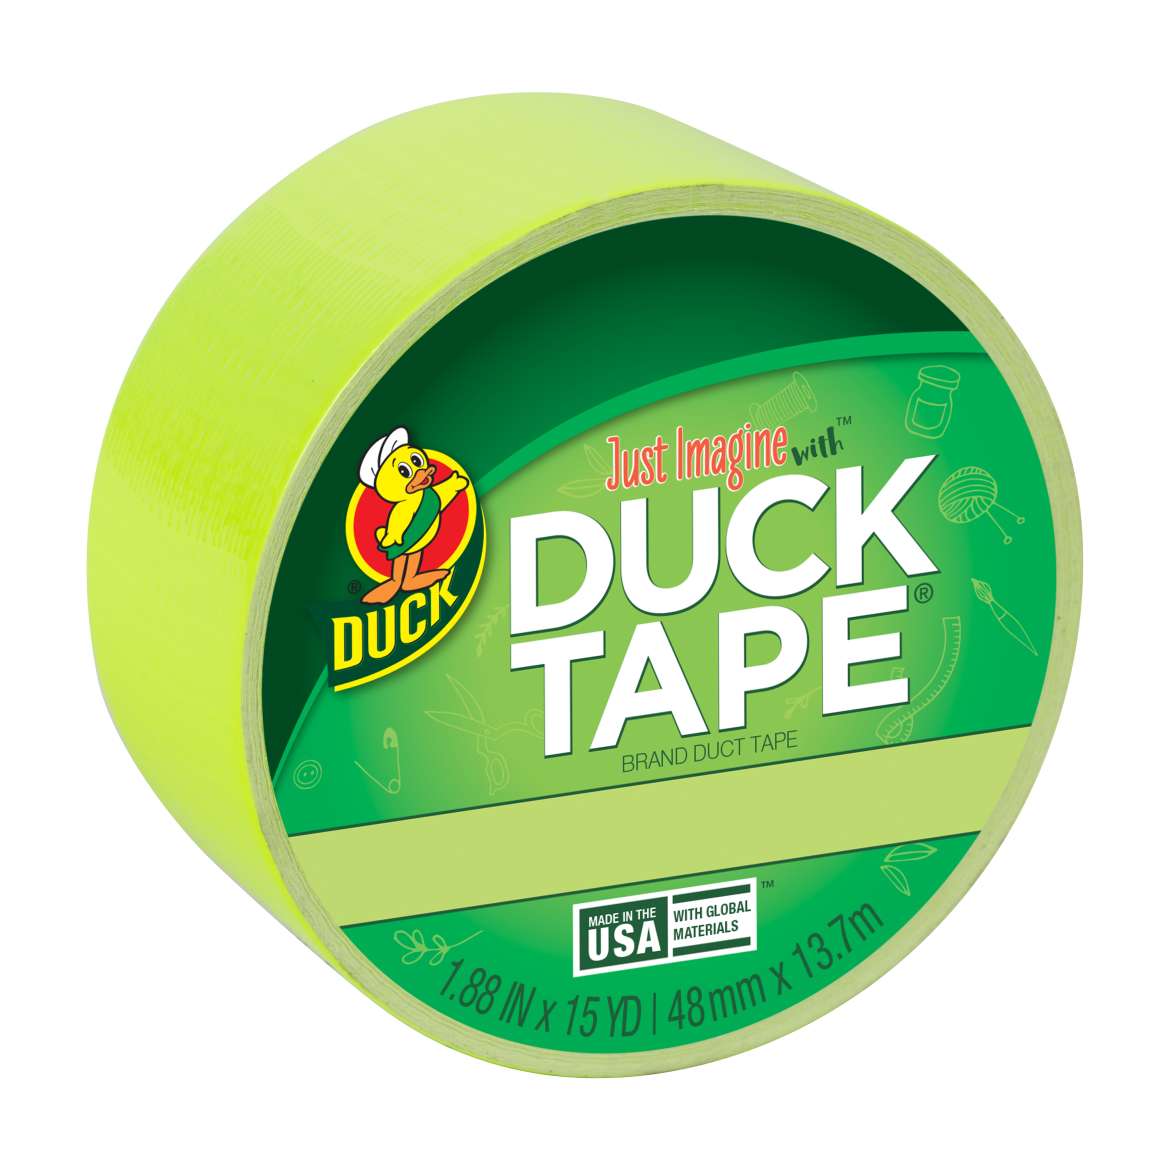 Color Duck Tape® Brand Duct Tape - Fluorescent Citrus, 1.88 in. x 15 yd.